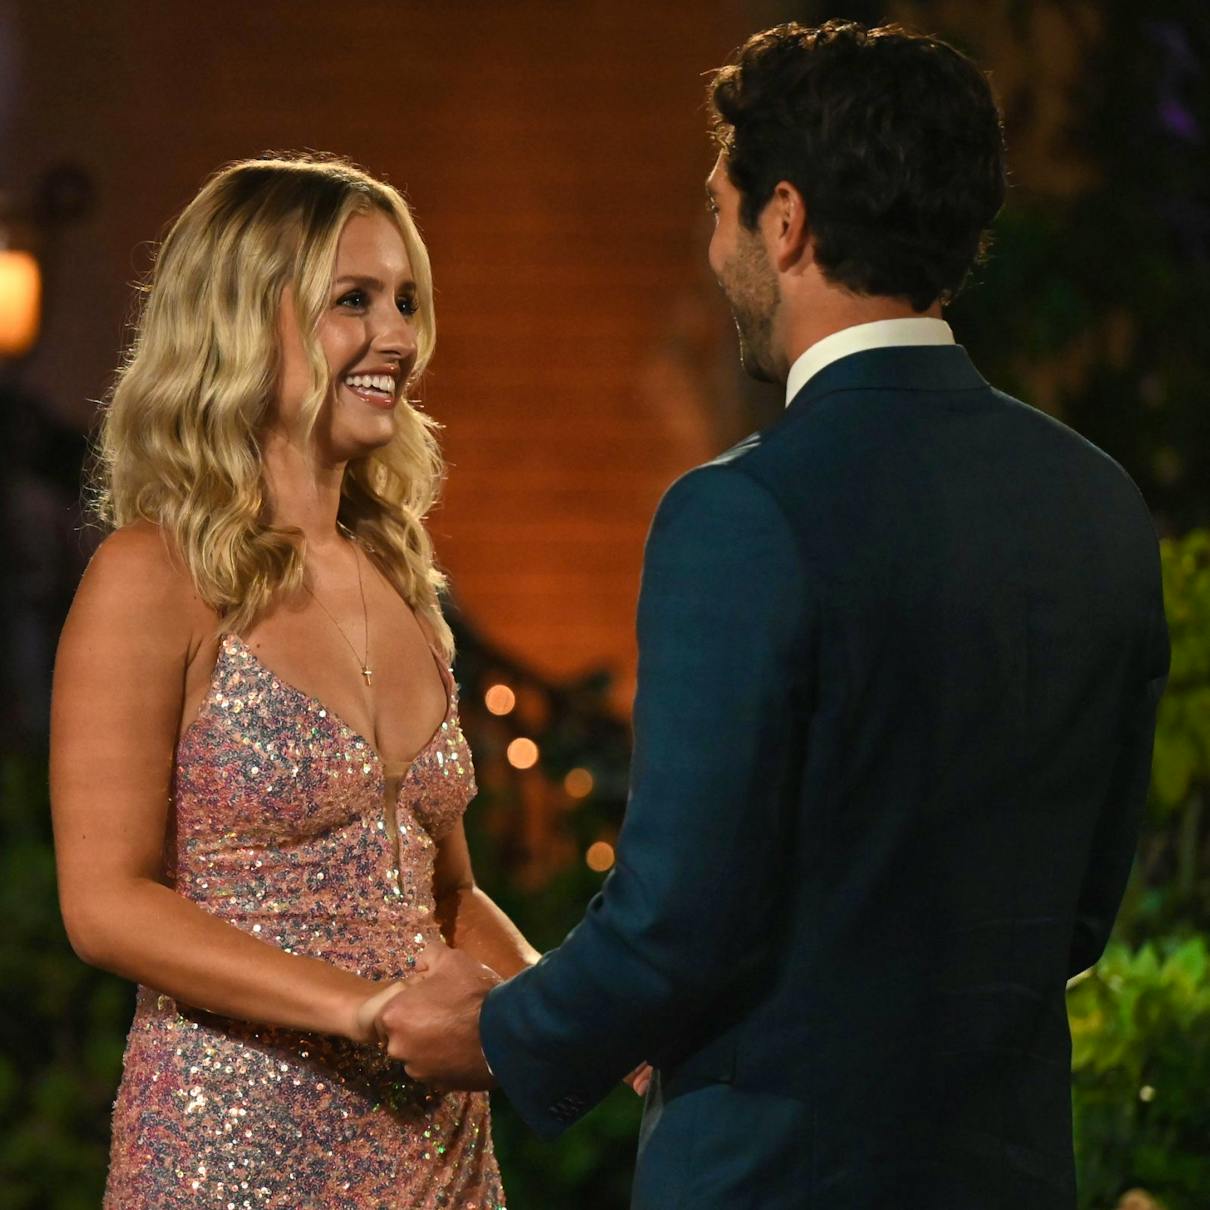 Joey took Daisy Kent on his first one-on-one date - The Bachelor ...